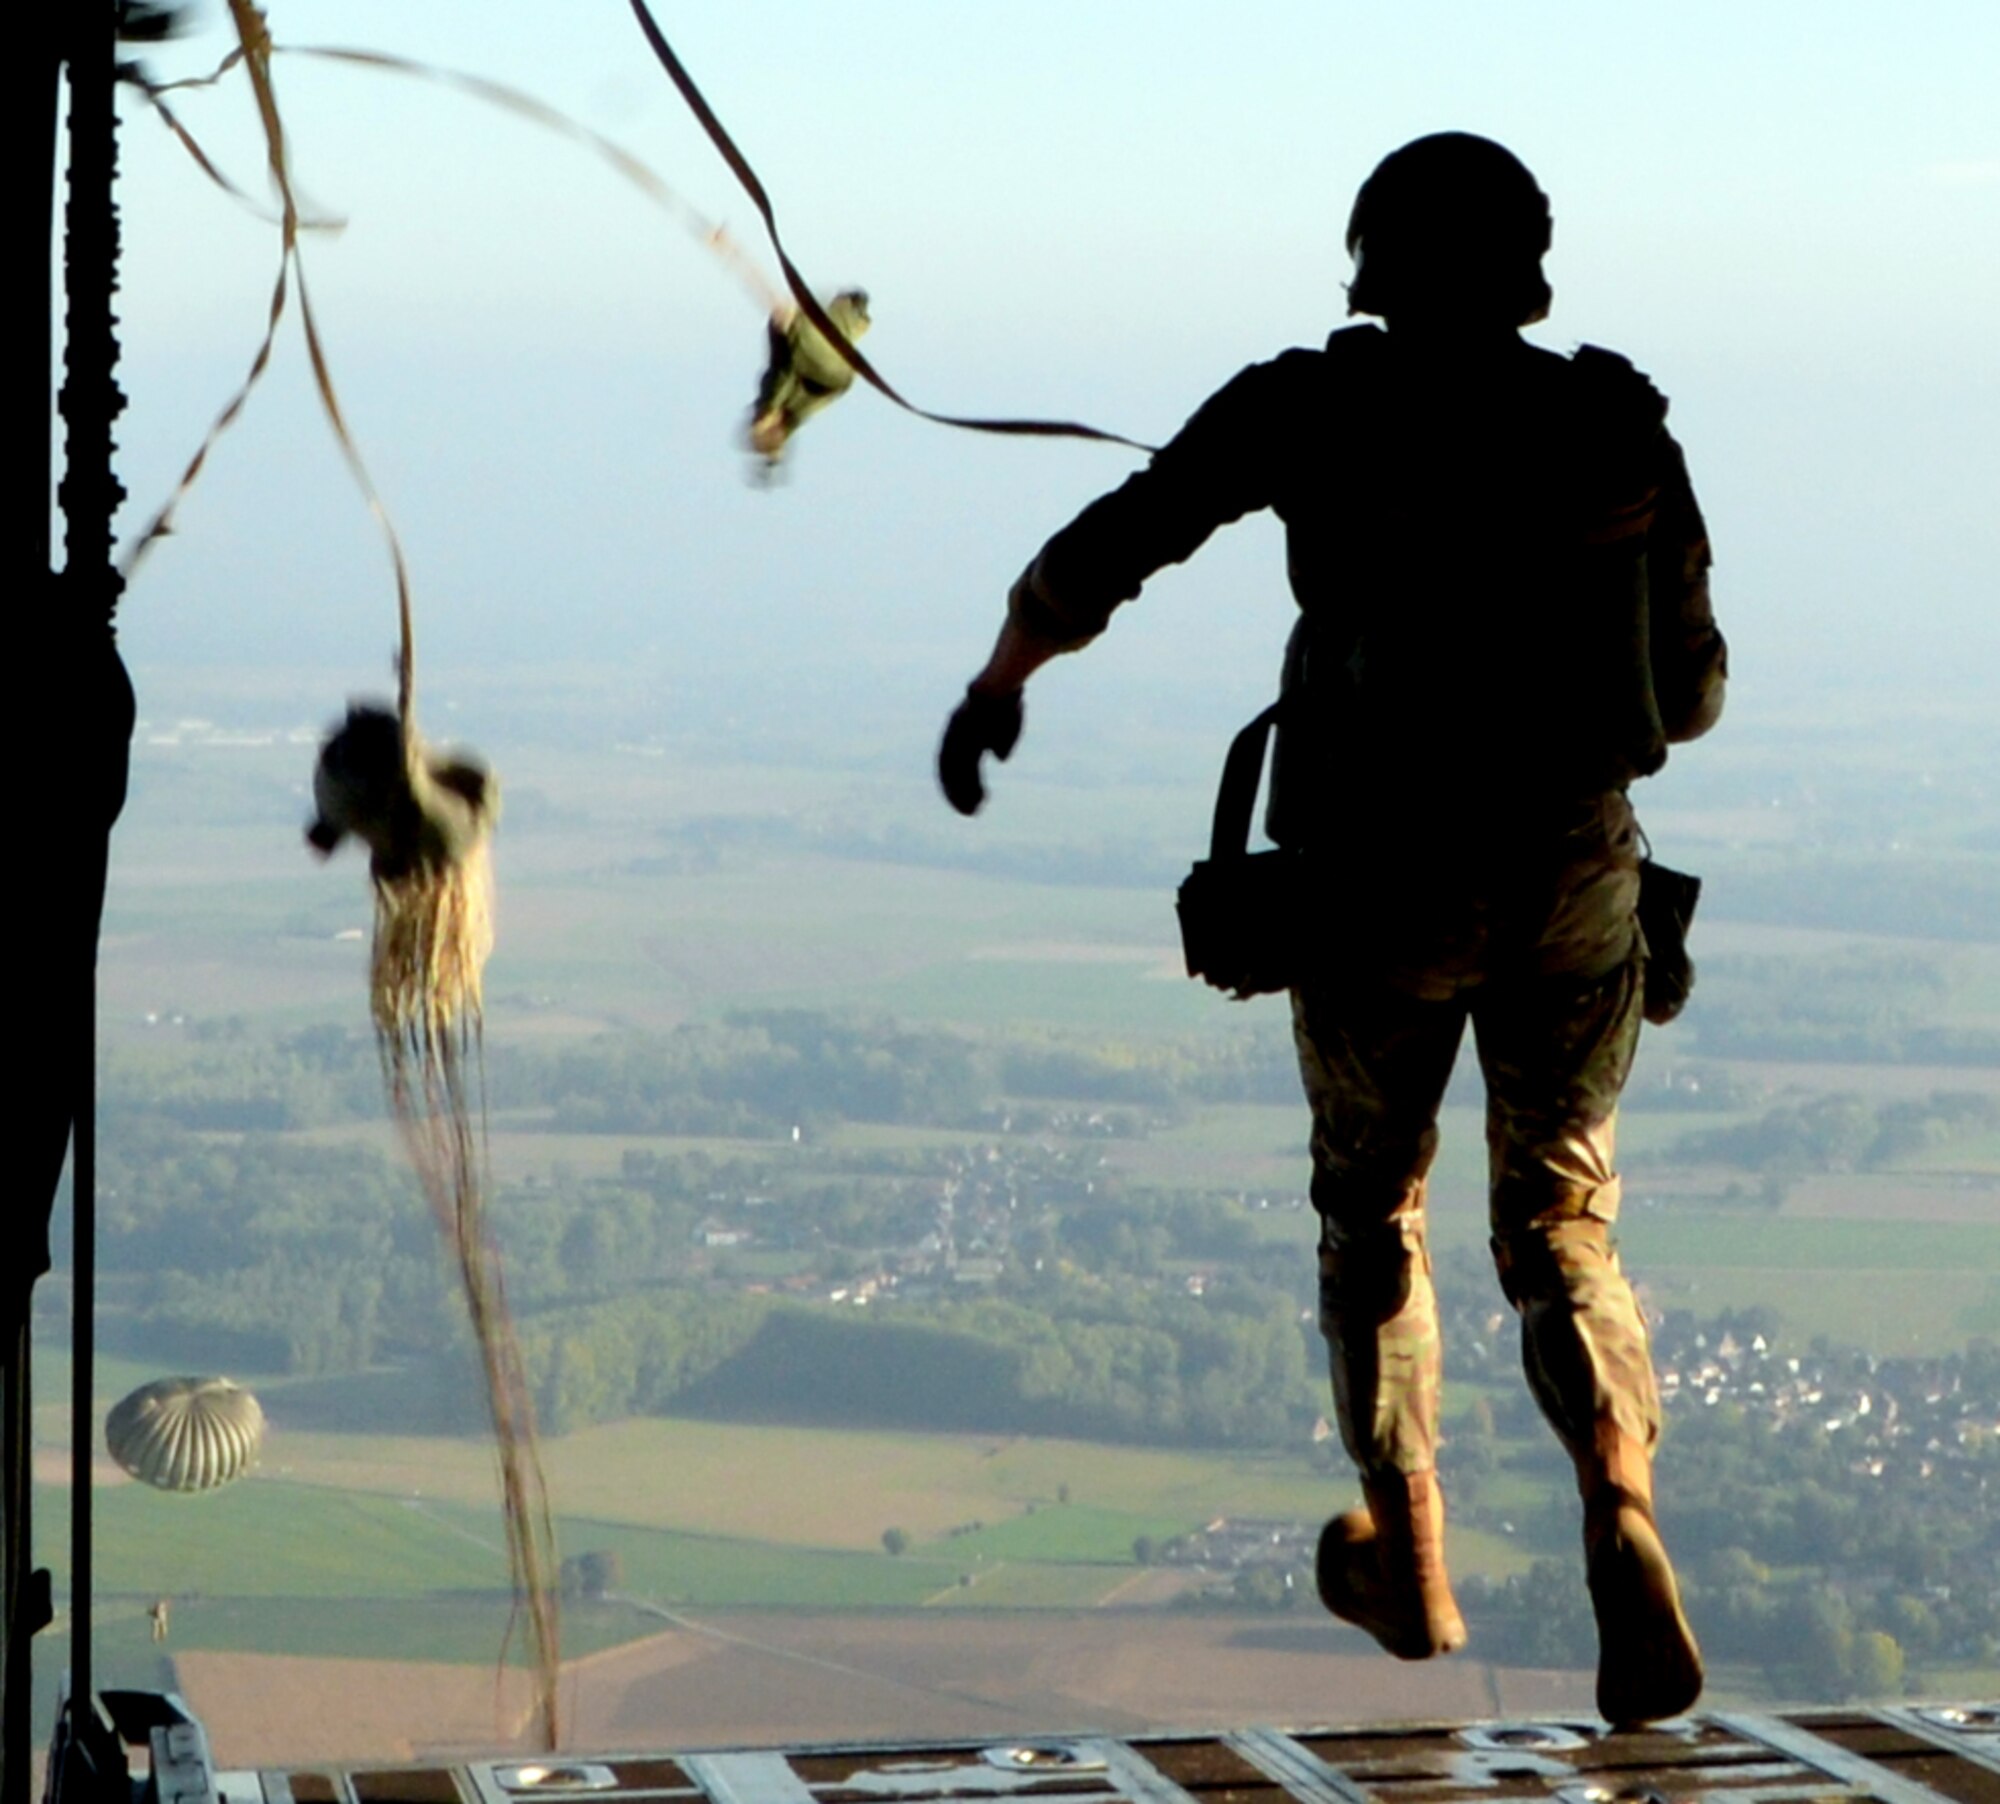 A parajumper airdrops from a C-130J Super Hercules aircraft over Chievres Air Base, Belgium, Oct. 4, 2018. Twelve parapjumpers participated in the jump on Chievres as a co-operablity exercise between Airmen from Chievers and Ramstein Air Base to show the base's ability to extend air power to Belgium. (U.S Air Force photo by Airman 1st Class Ariel Leighty)